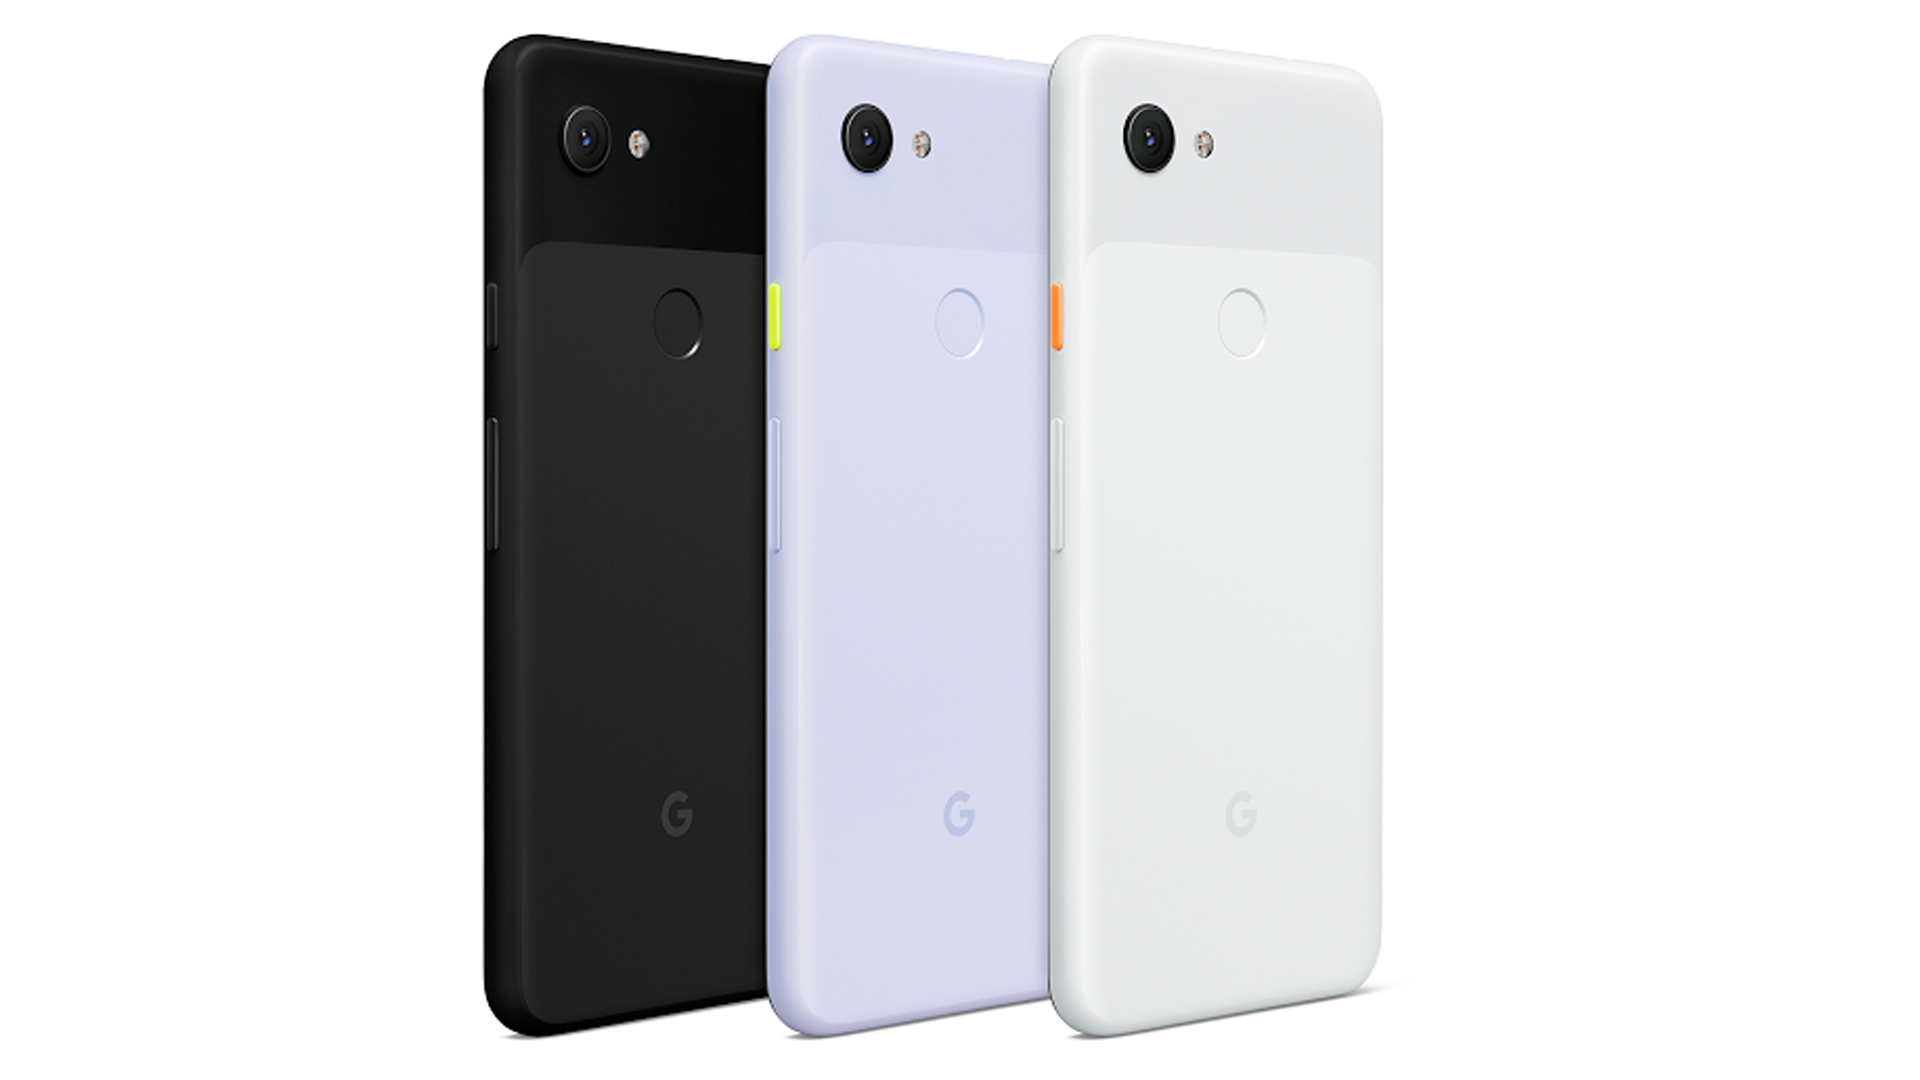 The Google Pixel 3a---a plastic phone that hardly weighs nothin'.